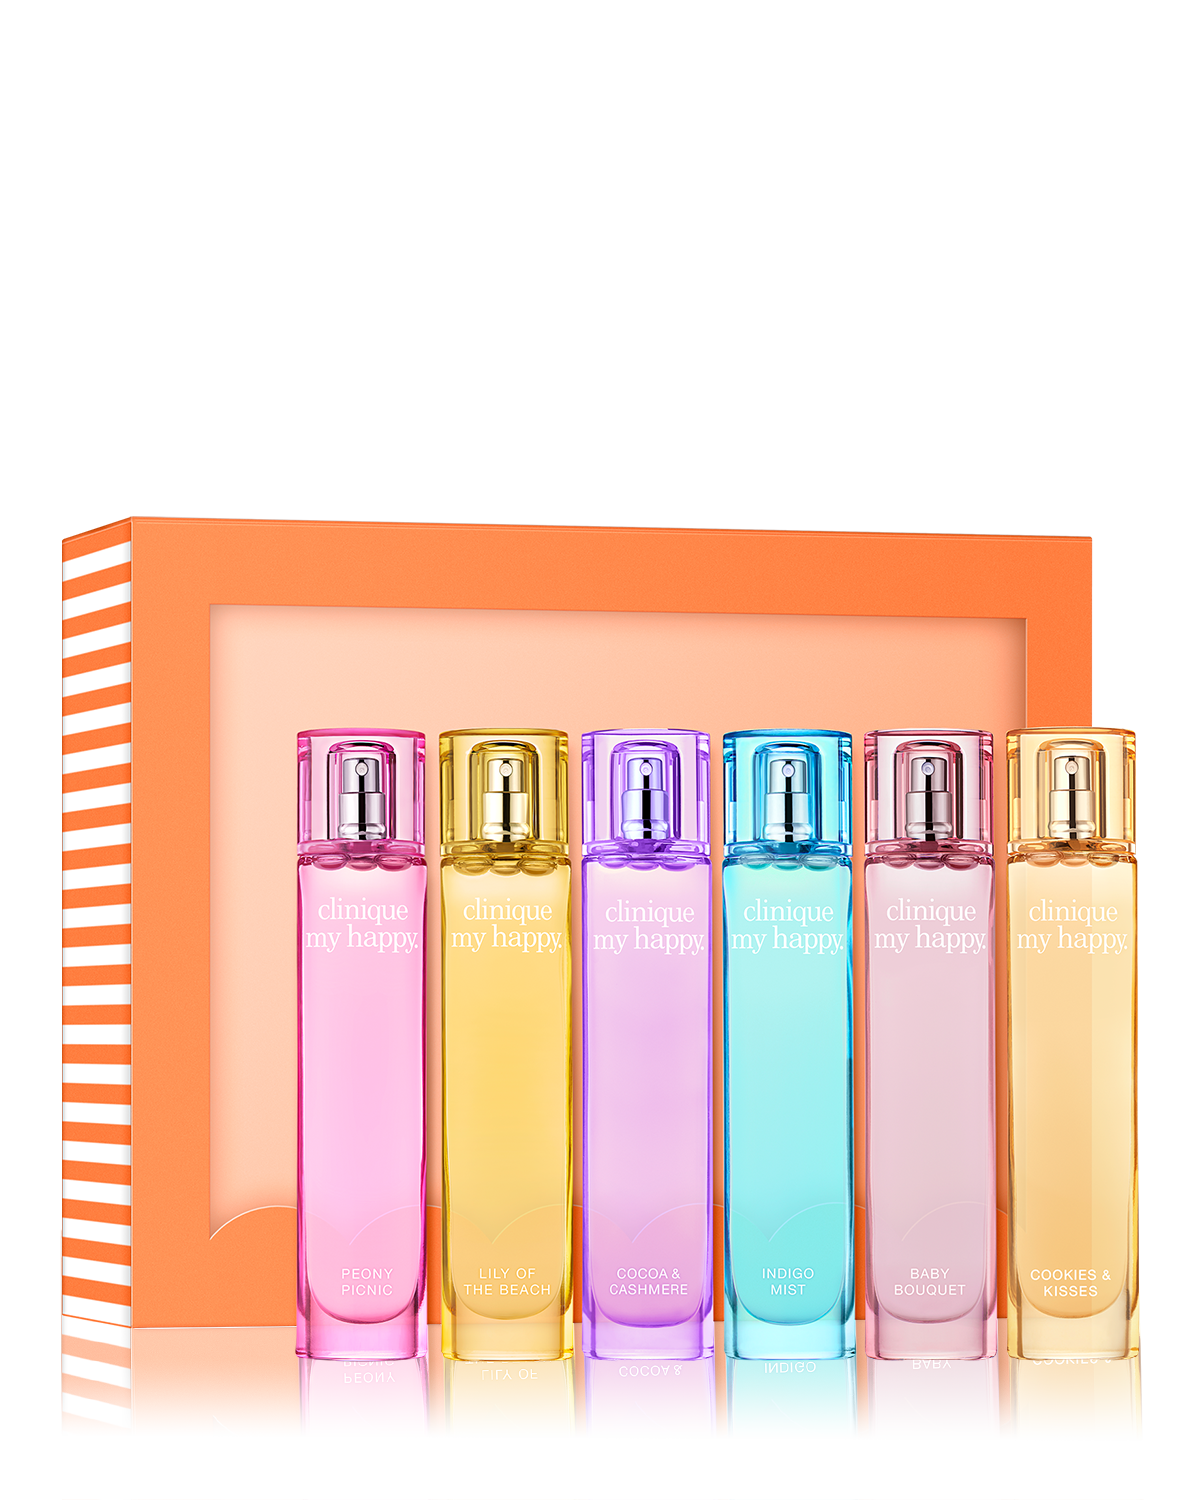 Create Your Own Happy: Fragrance Set